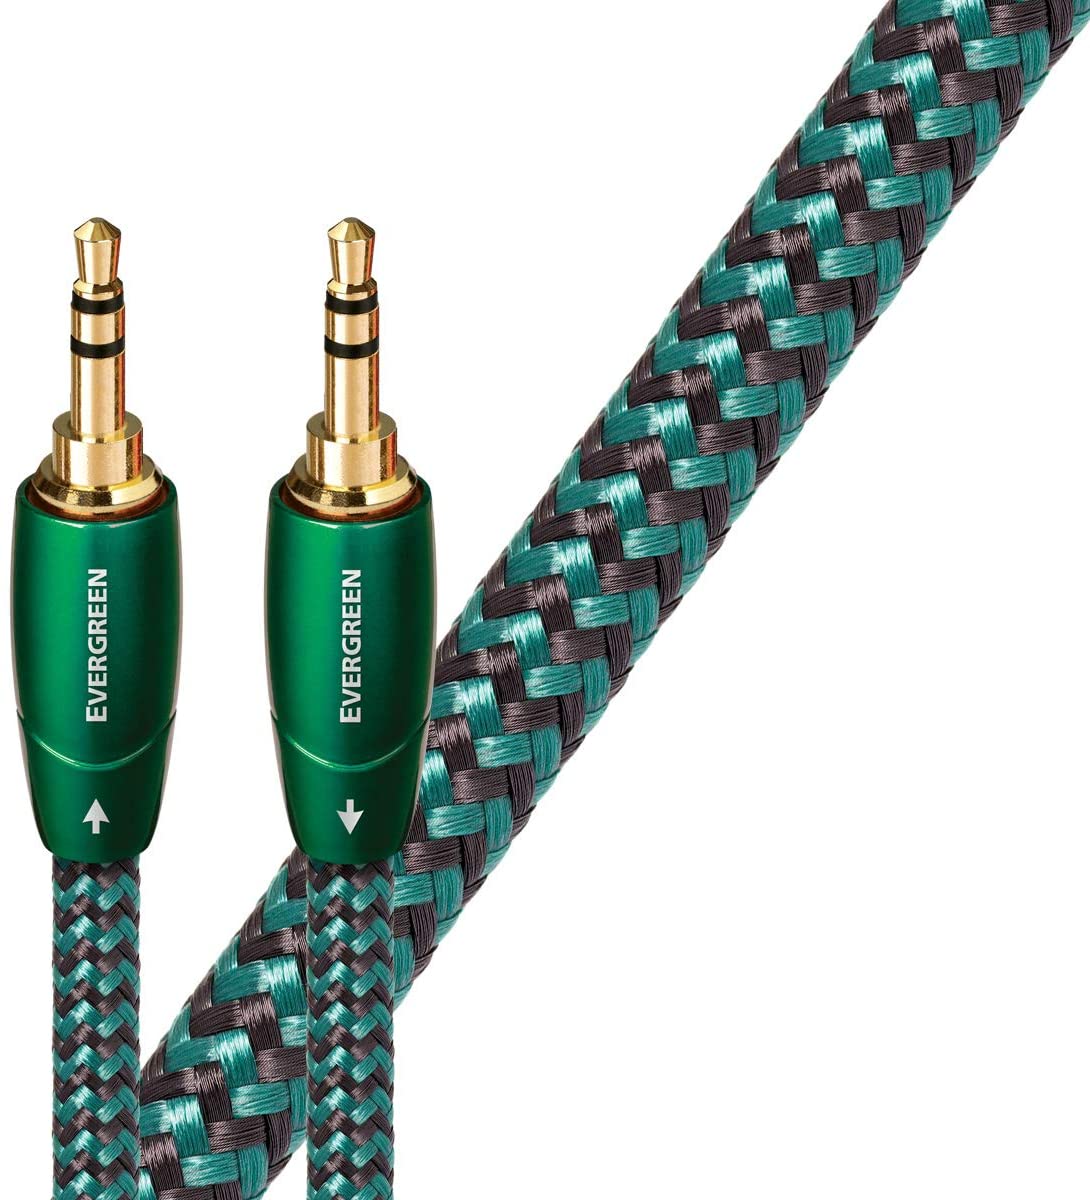 AudioQuest RCA and 3.5mm Analog Interconnects